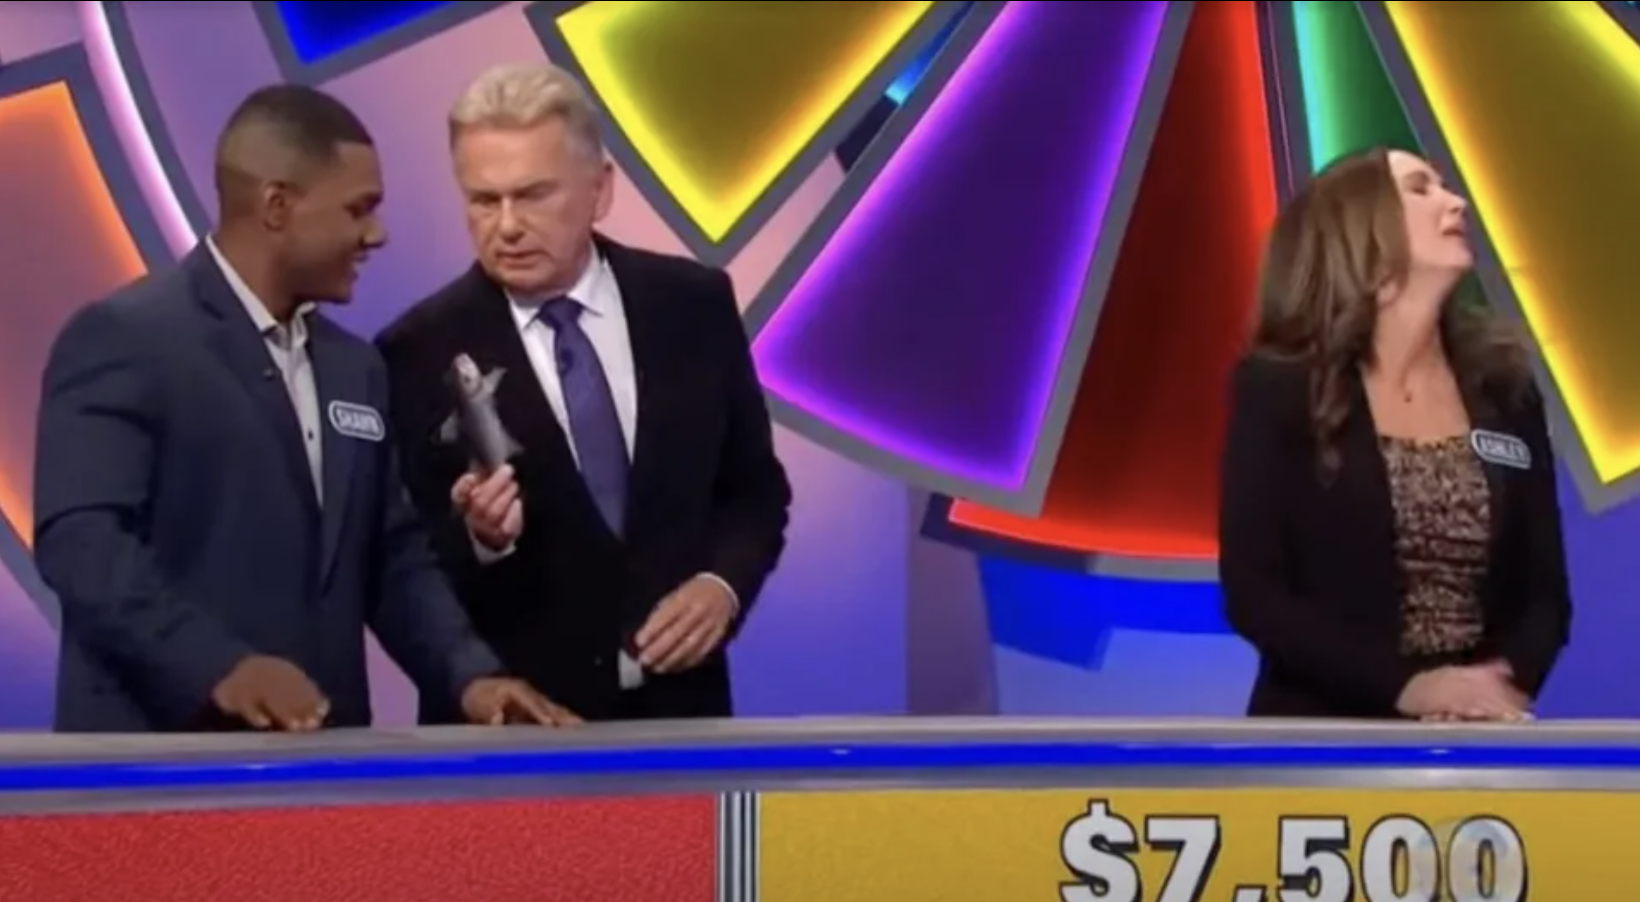 Pat Sajak's antics don't always thrill fans- or the contestants